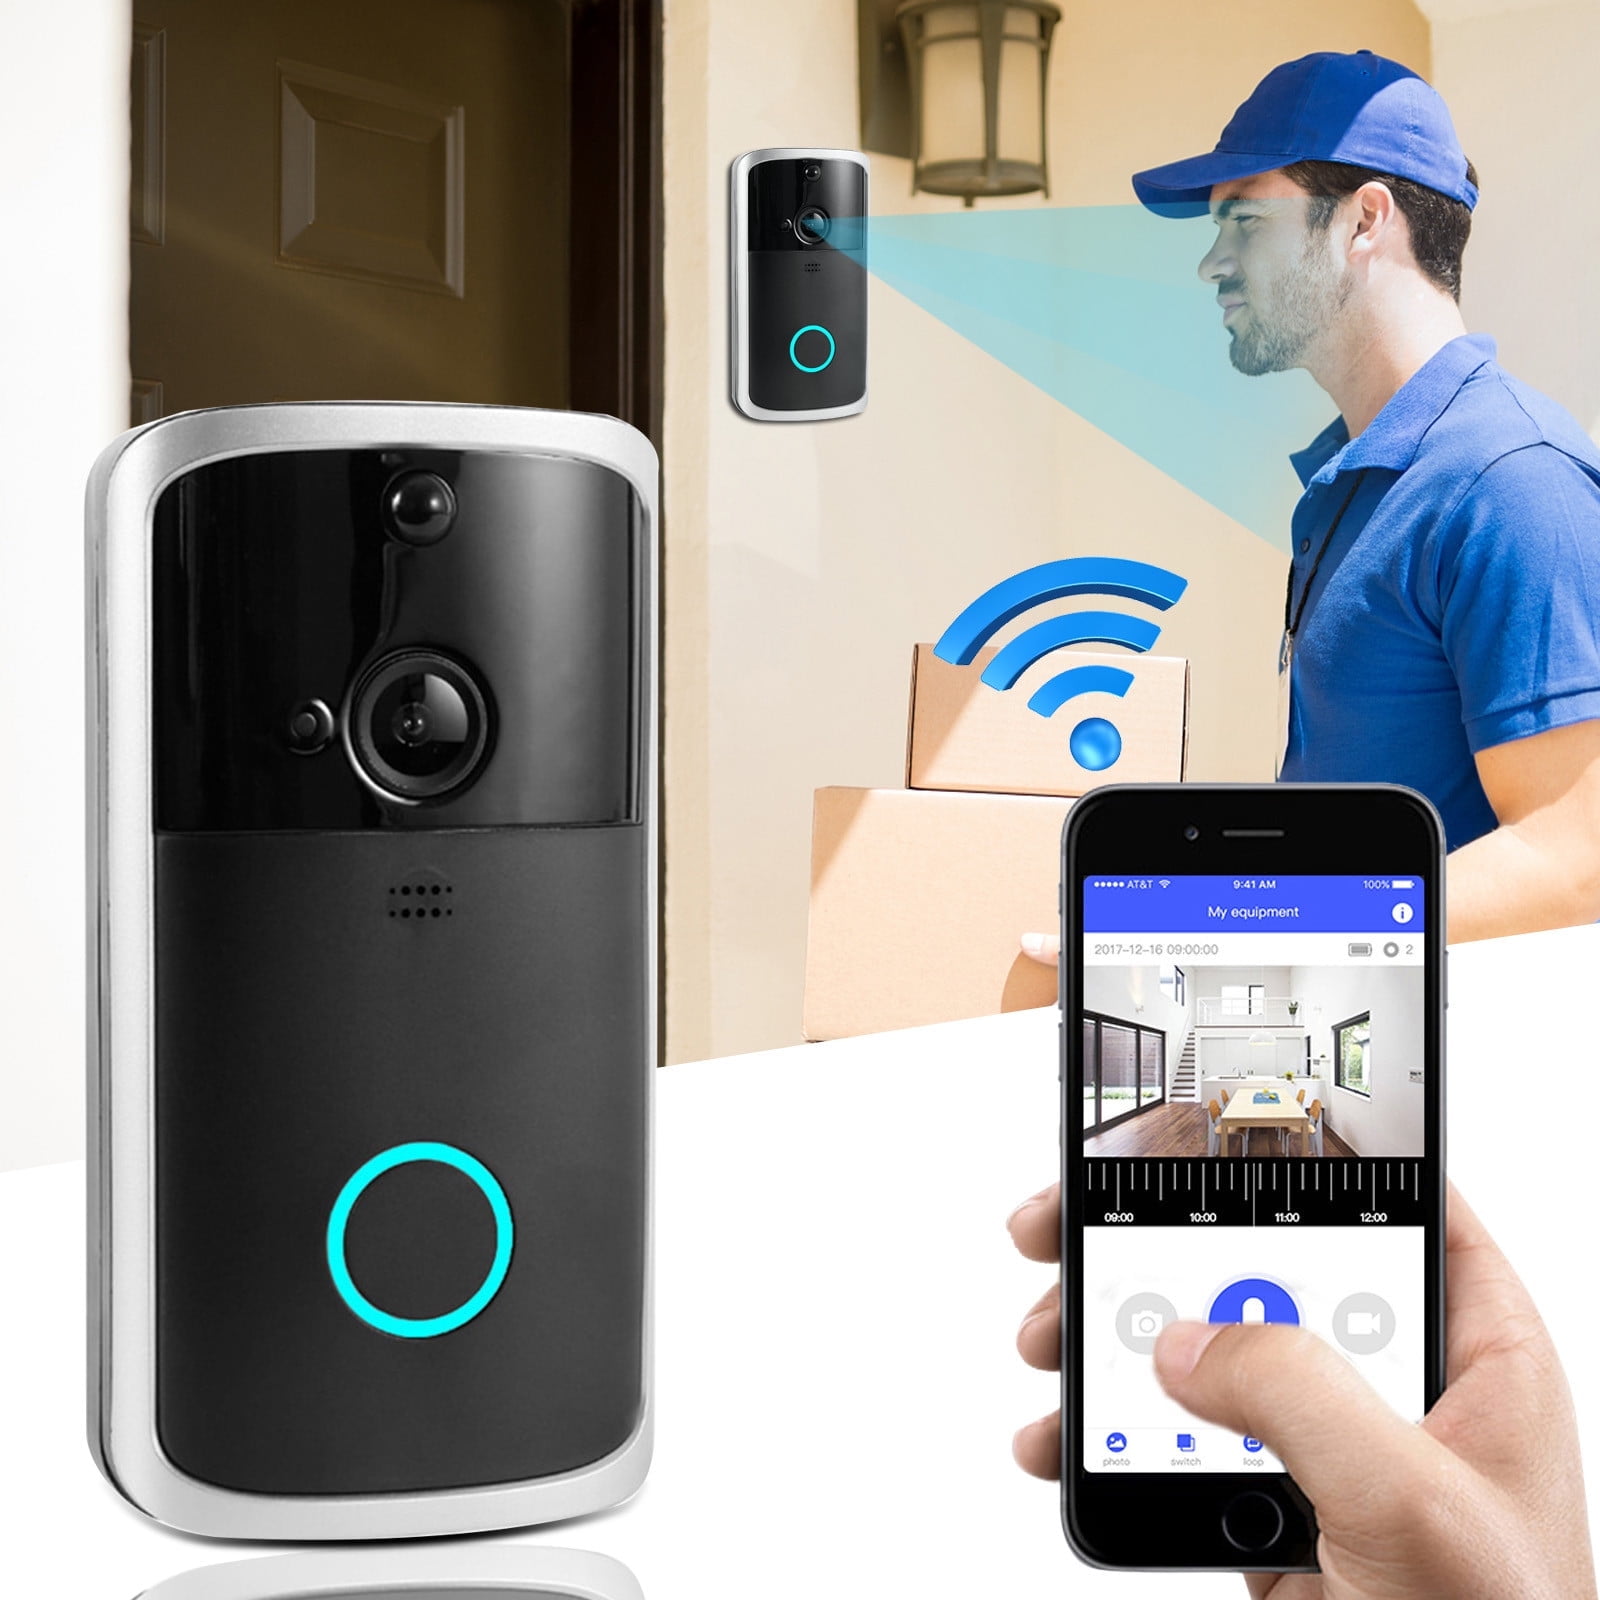 Kayannuo Clearance Wireless WiFi Video Doorbell Smart Phone Door Ring Intercom Security Camera Bell Back To School Wholesale 27639bbd 83f2 4d61 9ad6 0f8a8aa32371.1d8c8b4faf346a4a858b31b28413d668